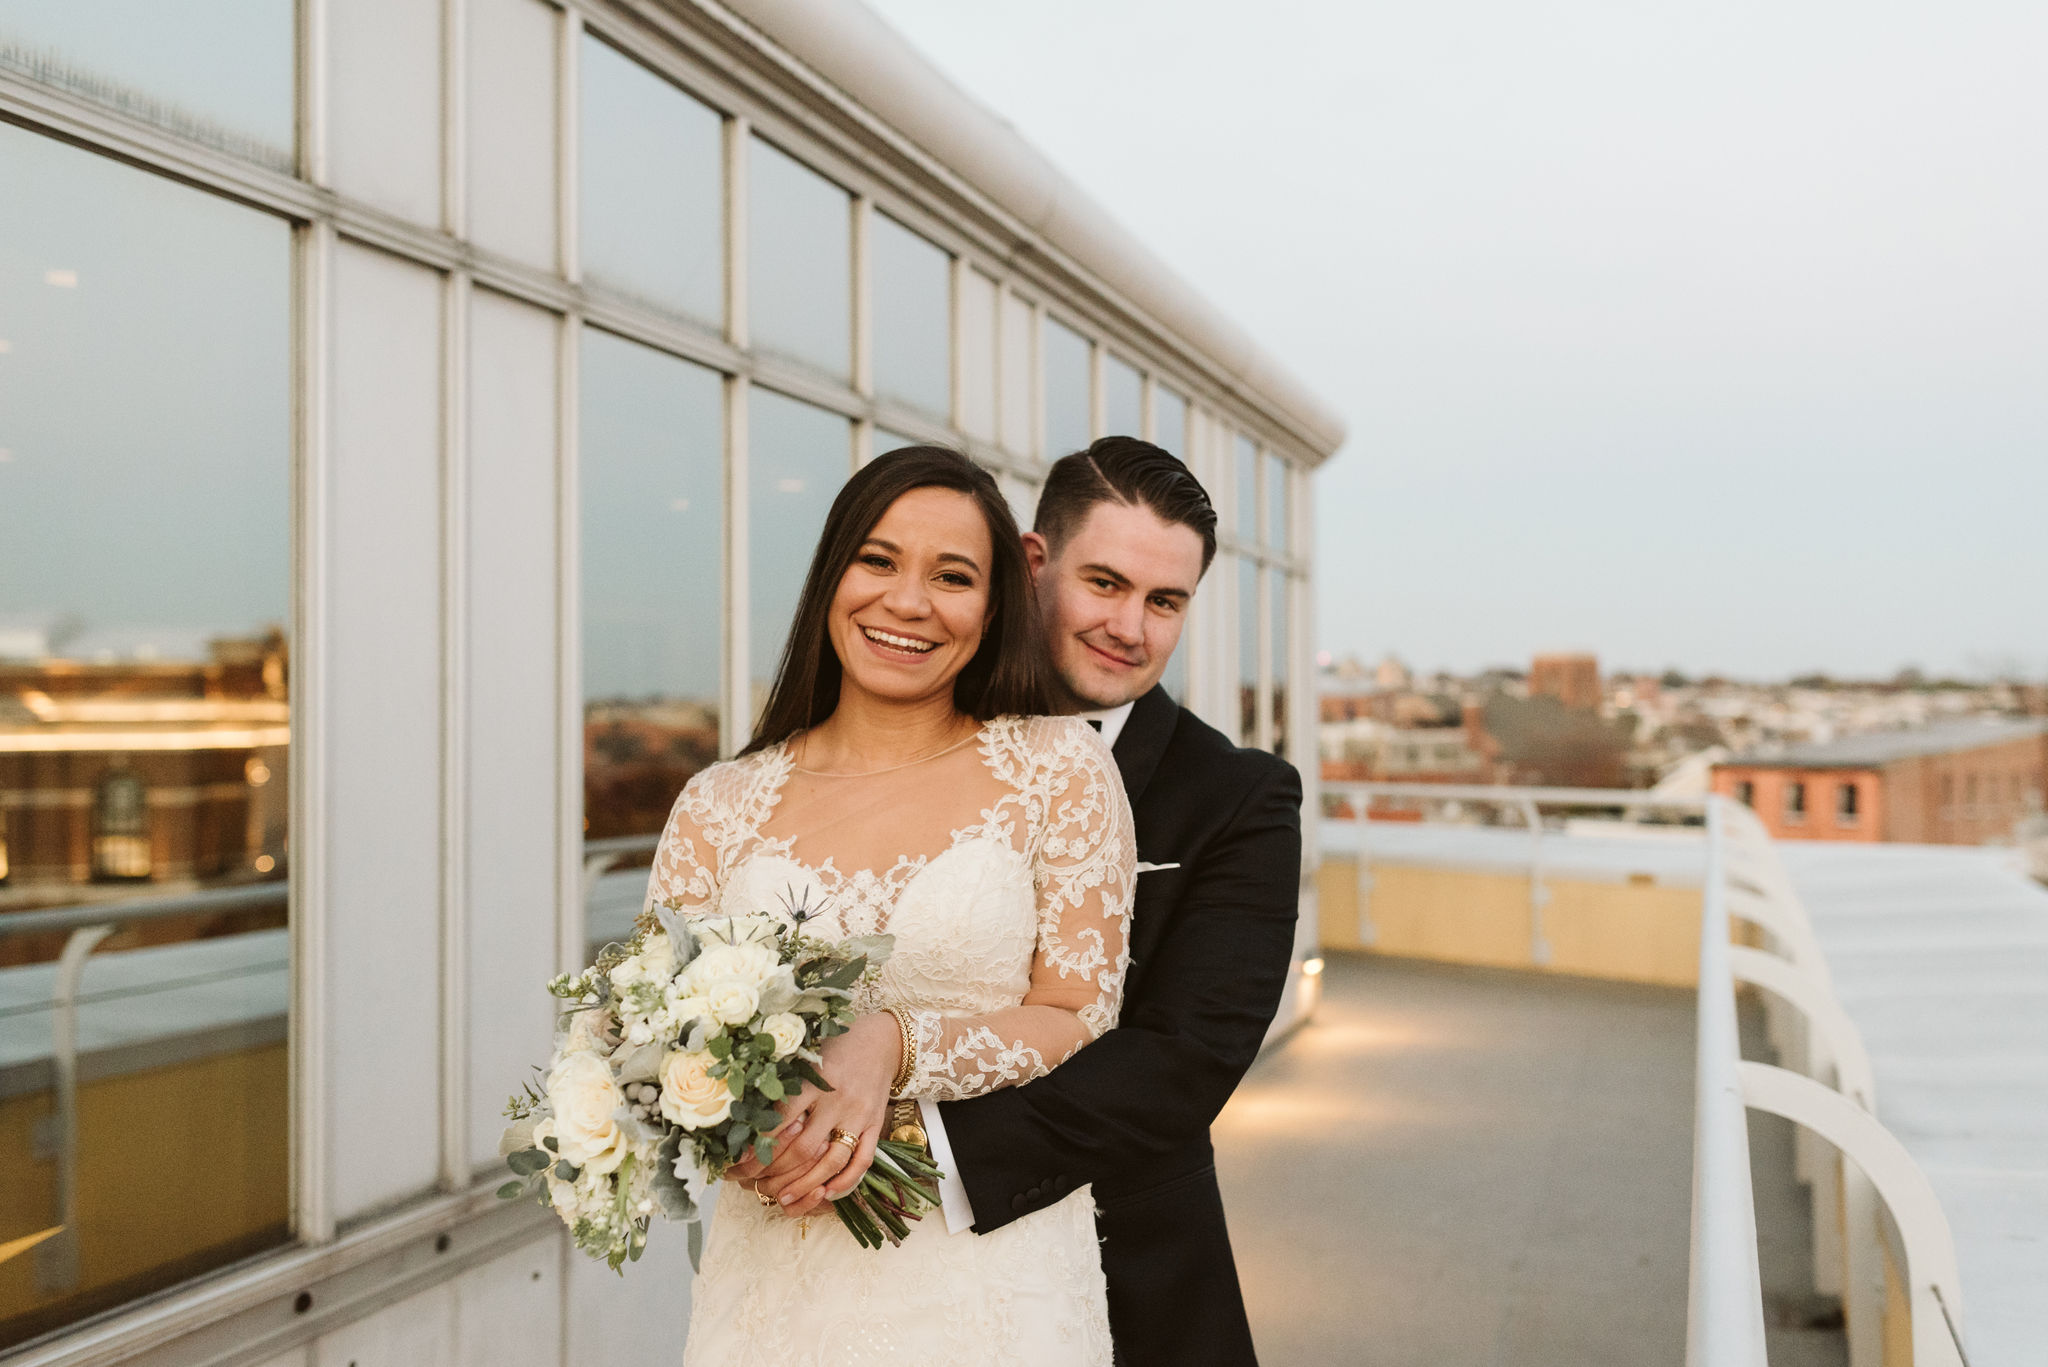  Baltimore, Fells Point, Maryland Wedding Photographer, Winter Wedding, Historic, Classic, Vintage, Portrait of Bride and Groom on Rooftop, Lace Wedding Dress, Black Suit, Beauty by Jacs 